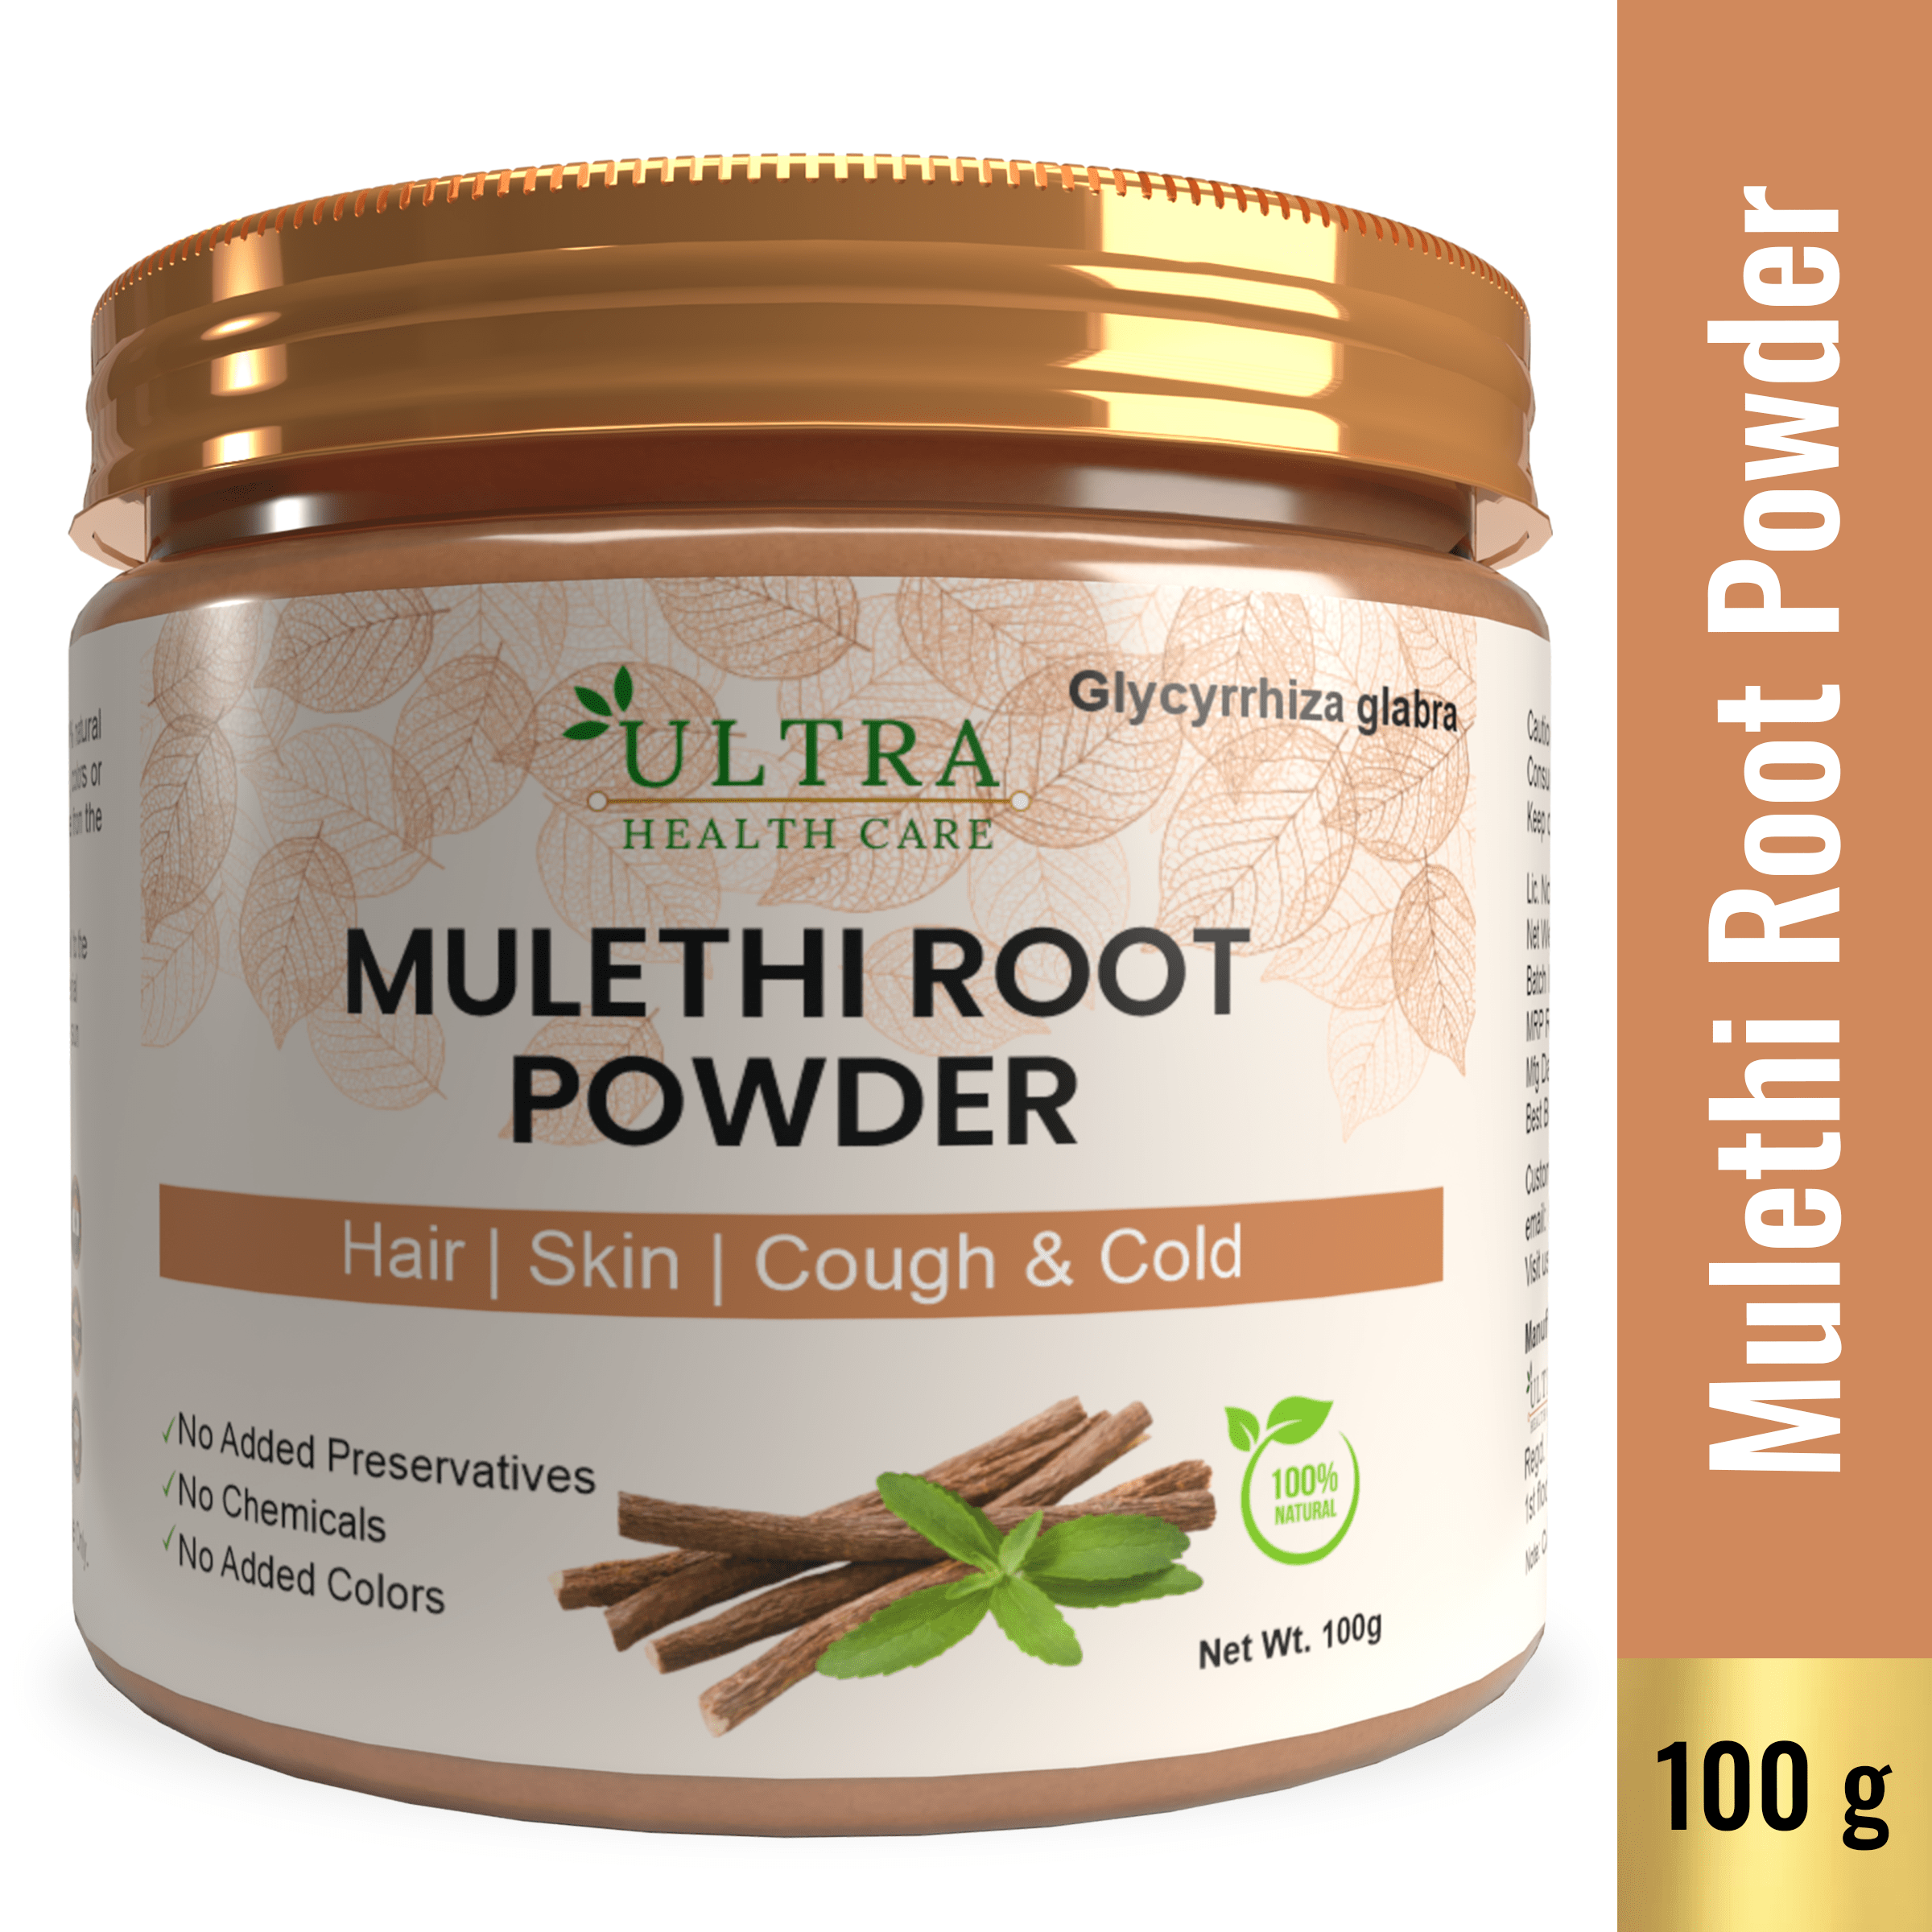 Buy Pure Mulethi Powder Online at Best Price in India